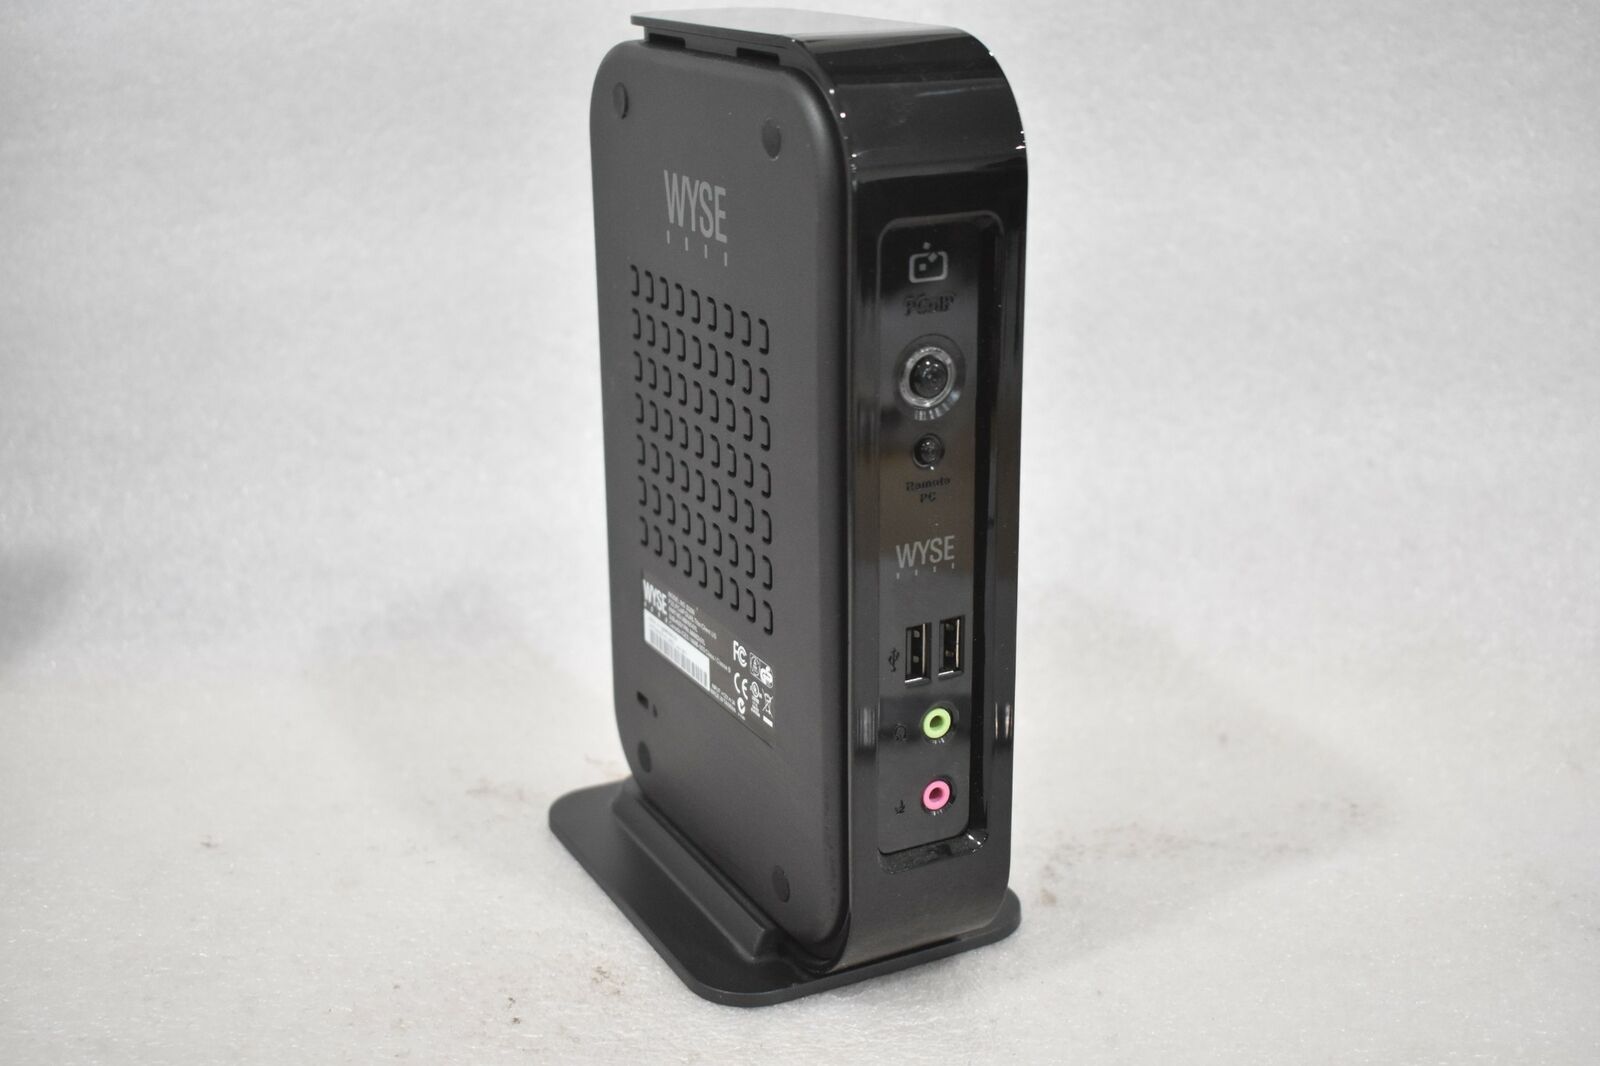 WYSE 909101-01L DUAL THIN CLIENT PC O IP CONNECTED MODEL D200 W/ POWER ADAPTER